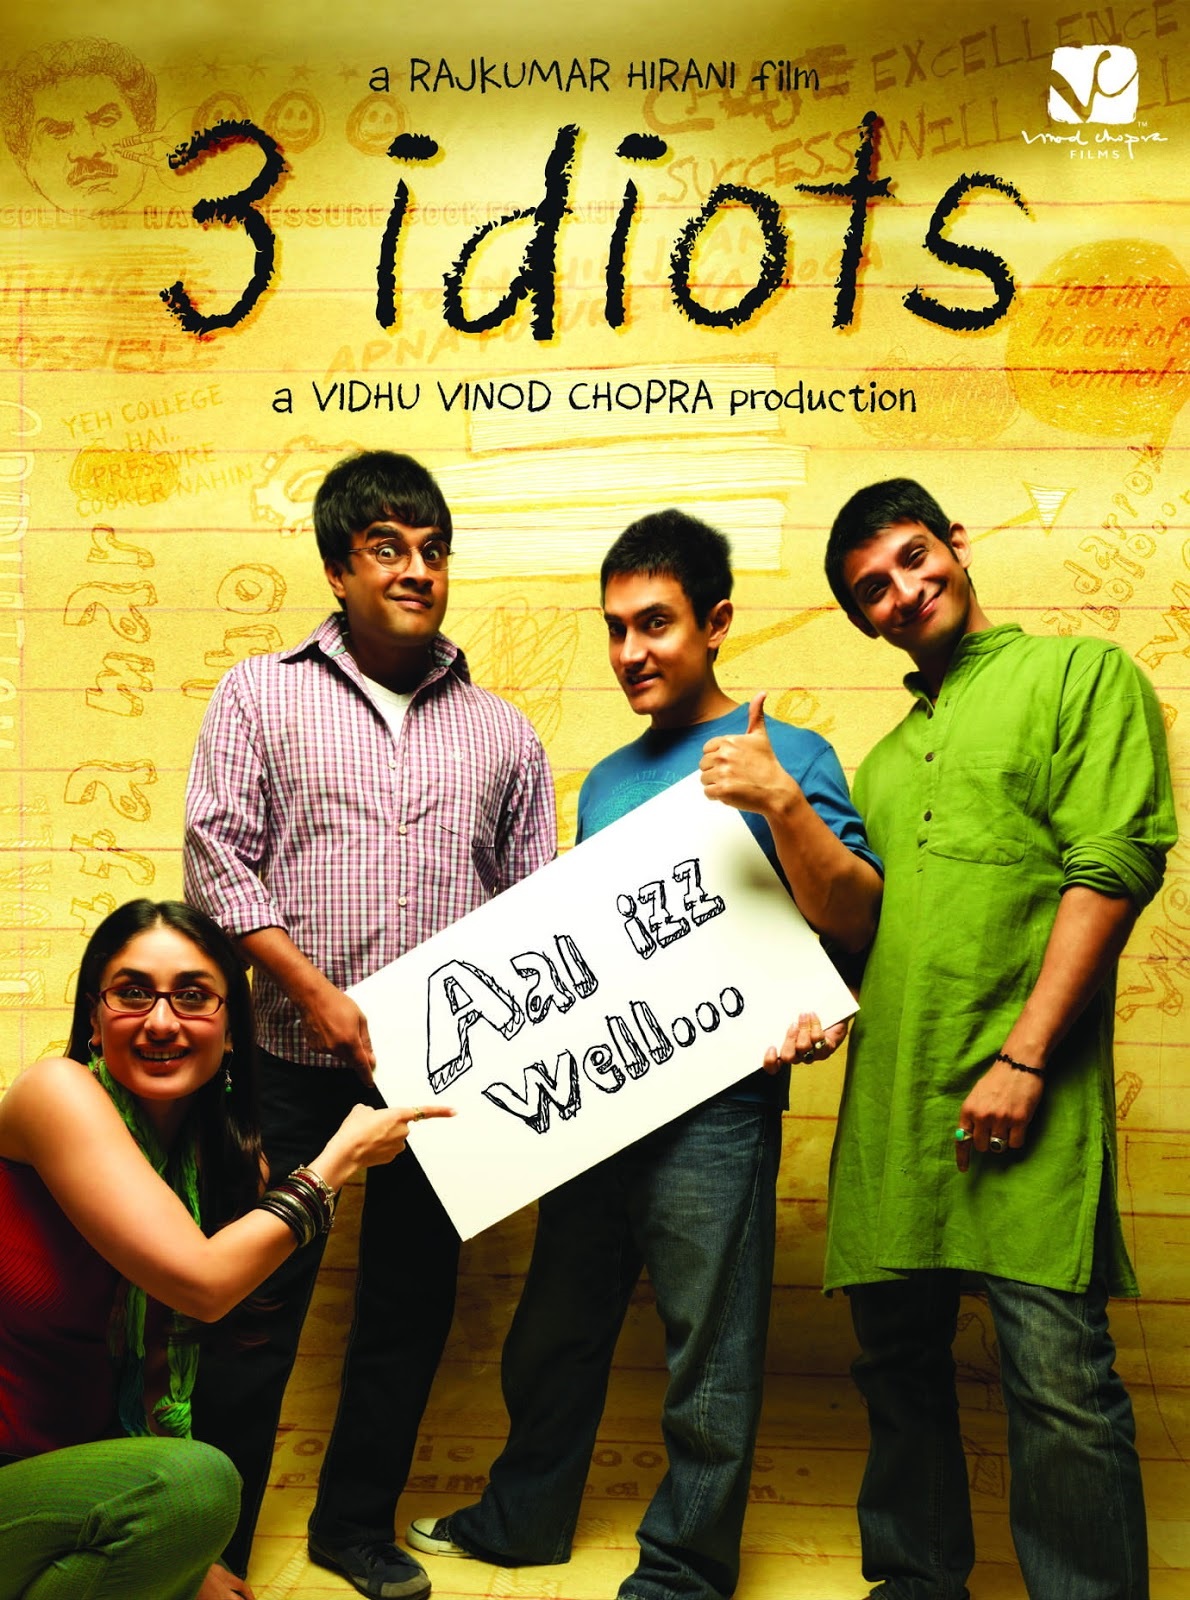 three idiots movie review in english